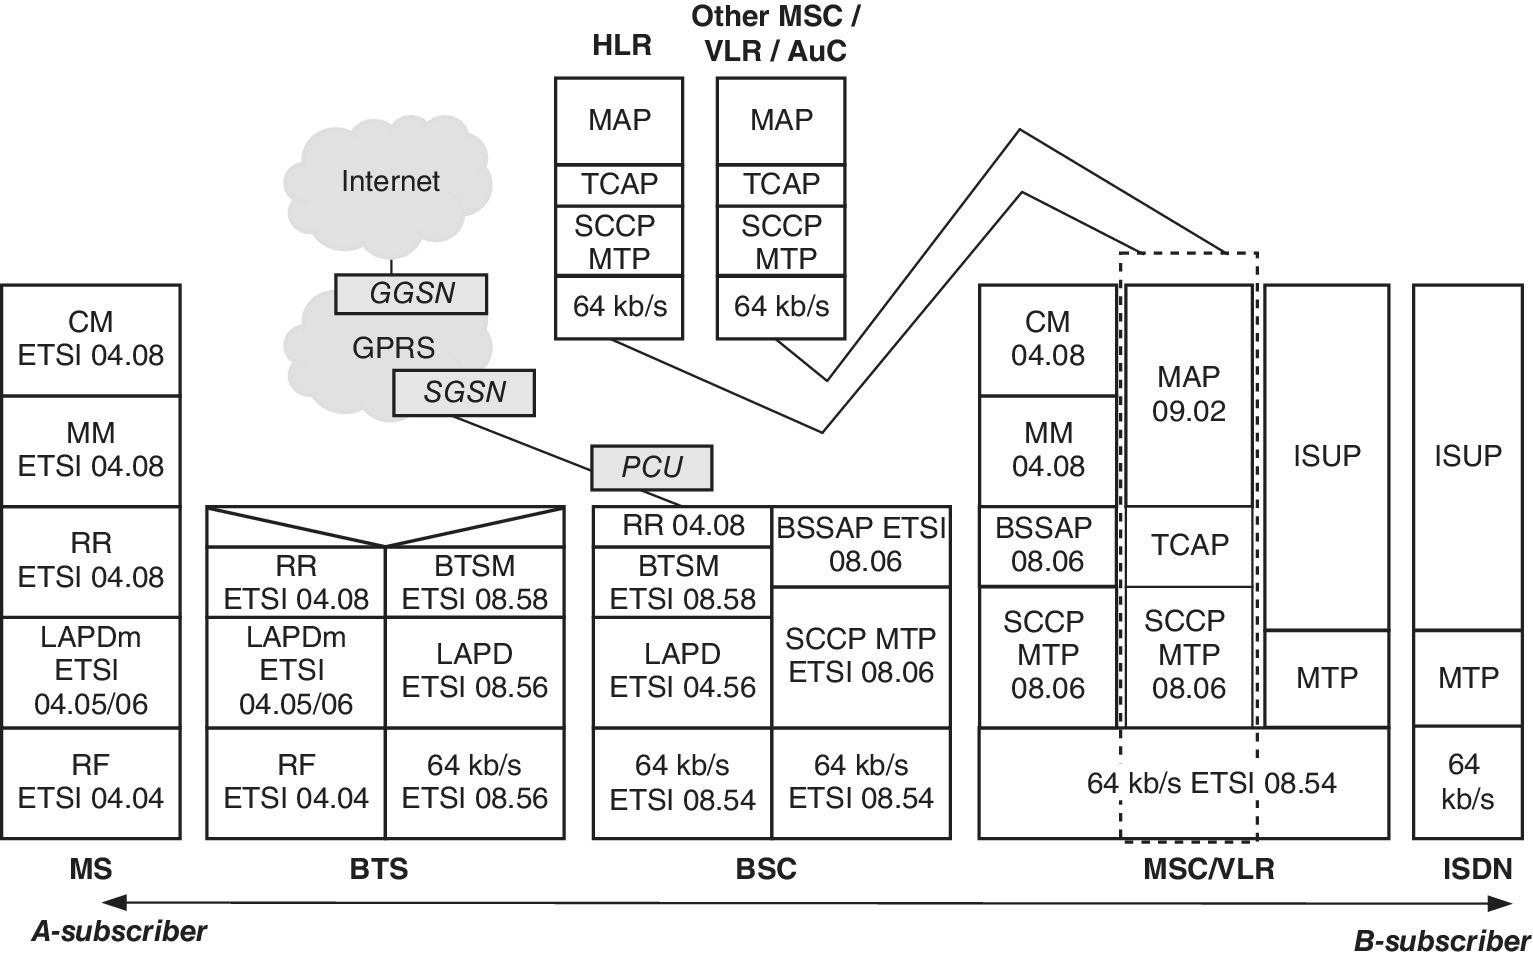 Diagram illustrating the original Phase 1 GSM system’s protocol stack from the 1990s, displaying 2-headed arrow with ends labeled A-subscriber (left) and B-subscriber (right) with stacks for MS, BTS, BSC, etc.